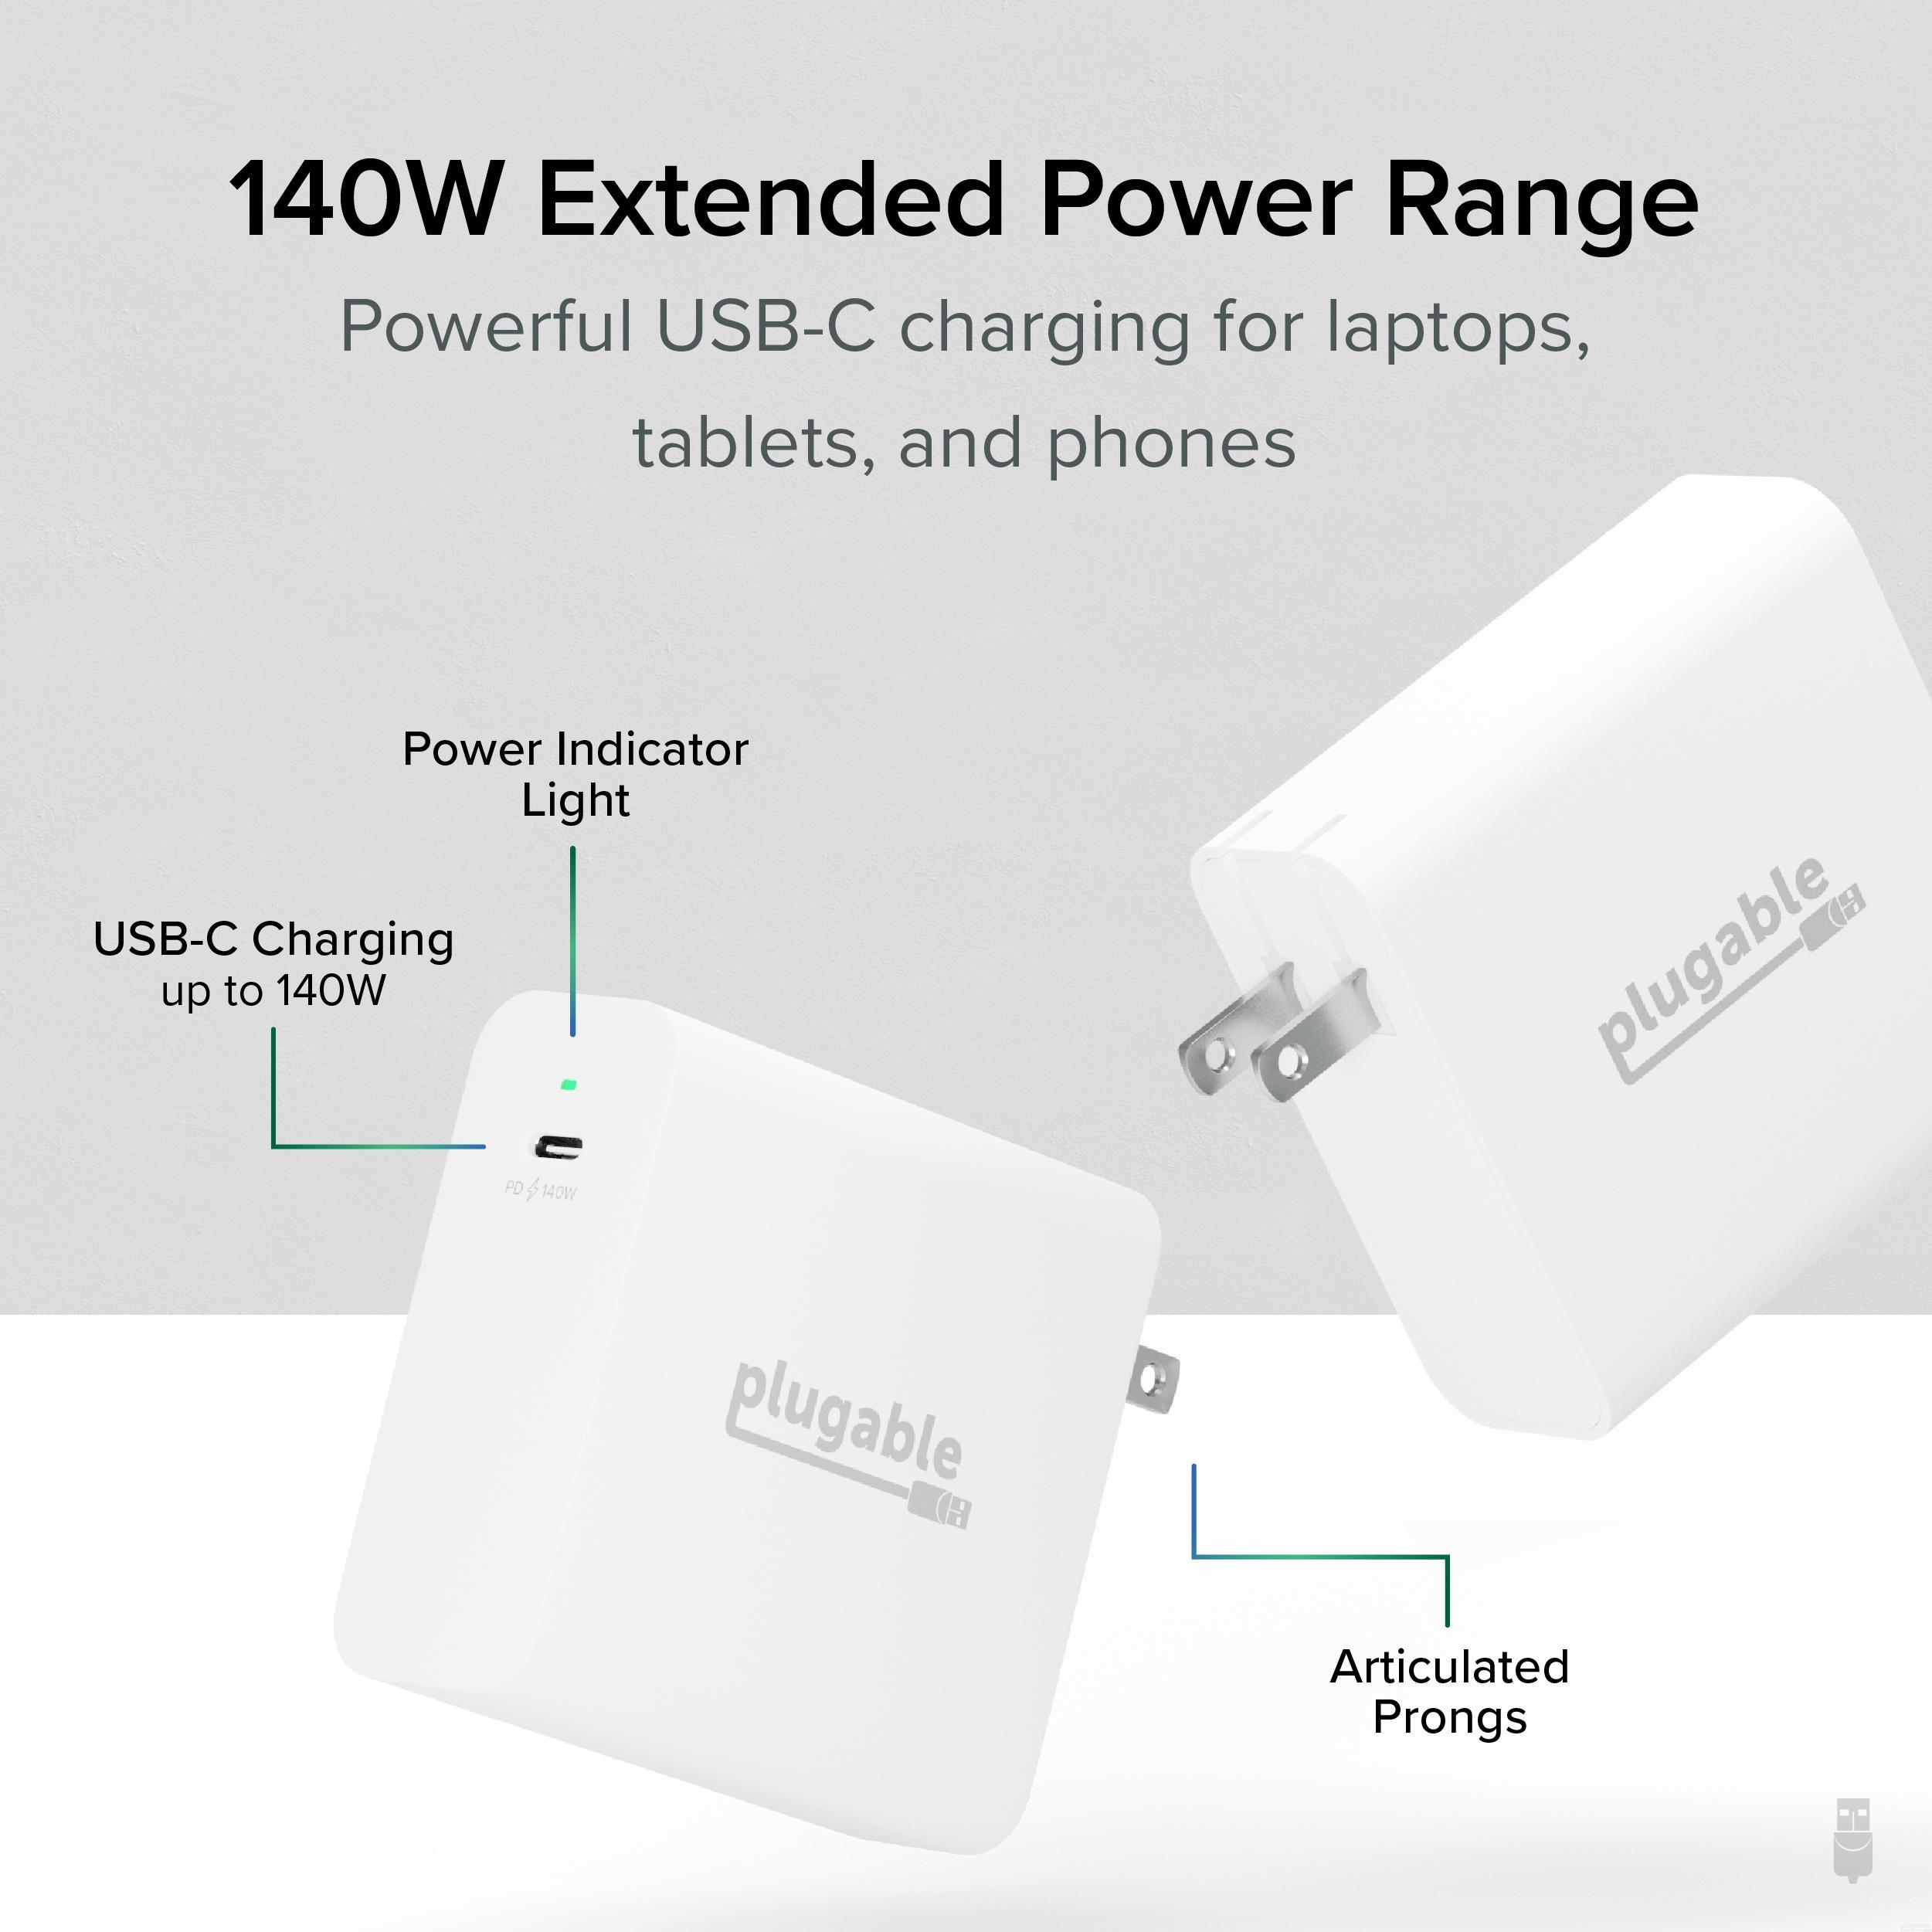 Plugable 140W USB C Charger, GaN Wall Charger for Laptop, PD 3.1 (EPR) Power Adapter is Compatible with USB-C MacBook Pro, Macbook Air iPad Pro, Surface and USB-C Devices, Compact and Portable Charger - image 4 of 10